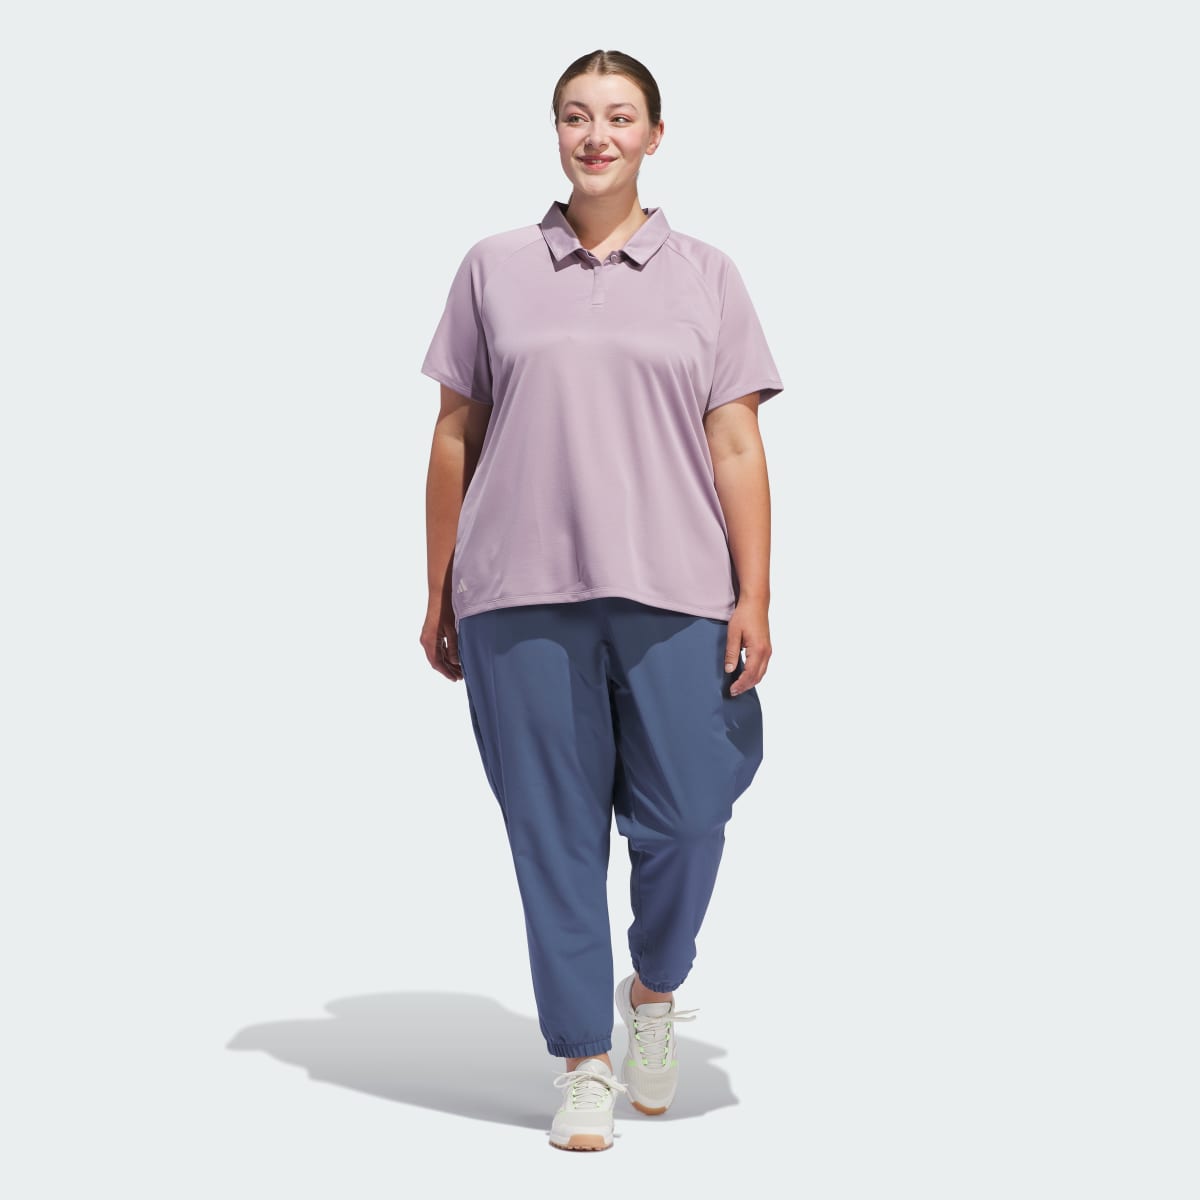 Adidas Polo HEAT.RDY Ultimate365 – Mulher (Plus Size). 5